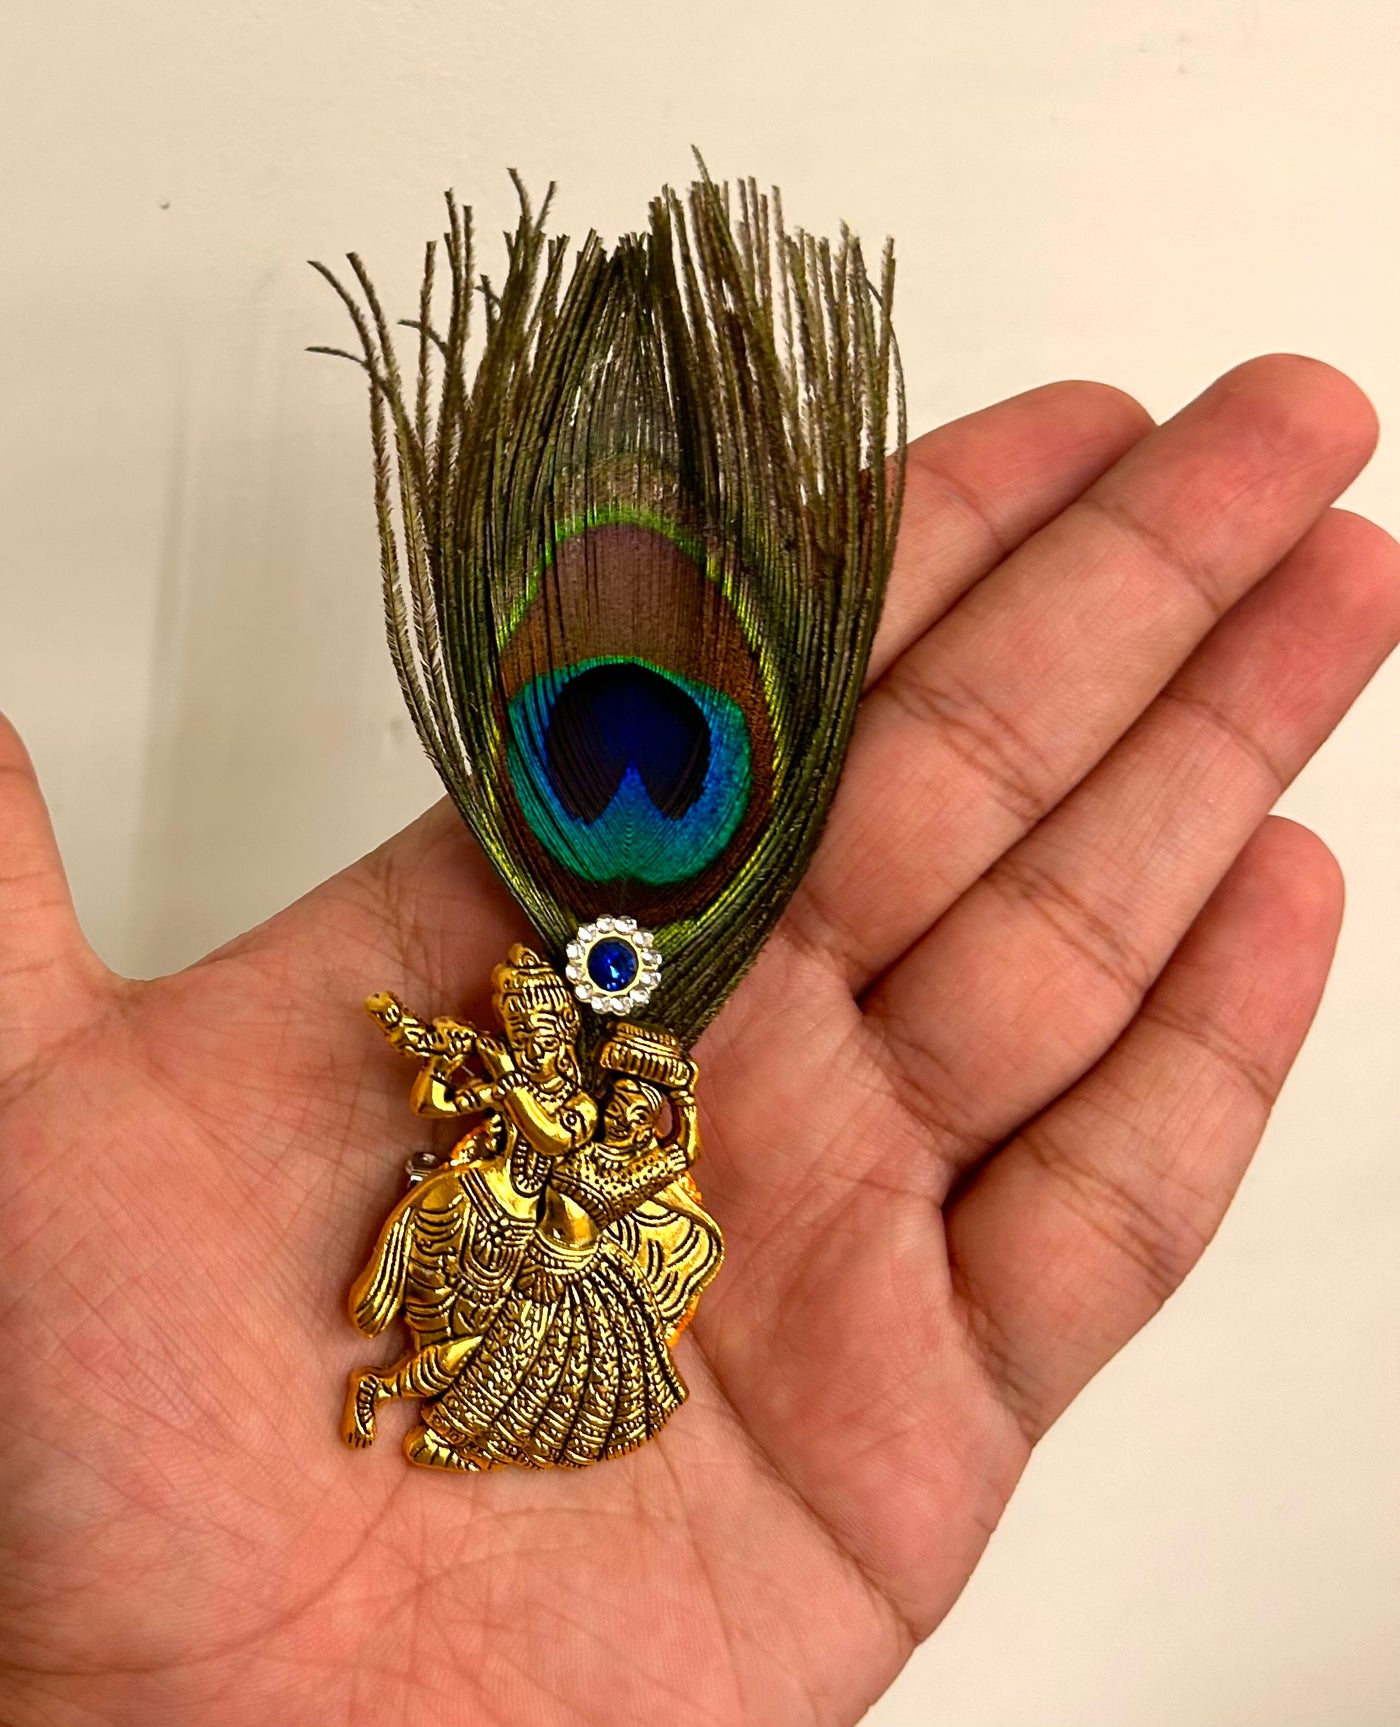 LAMANSH Metal Radha krishna ji brooches with mor pankh 🦚 / Welcome gifts for barati's and guests in weddings and hotels resorts or destination weddings